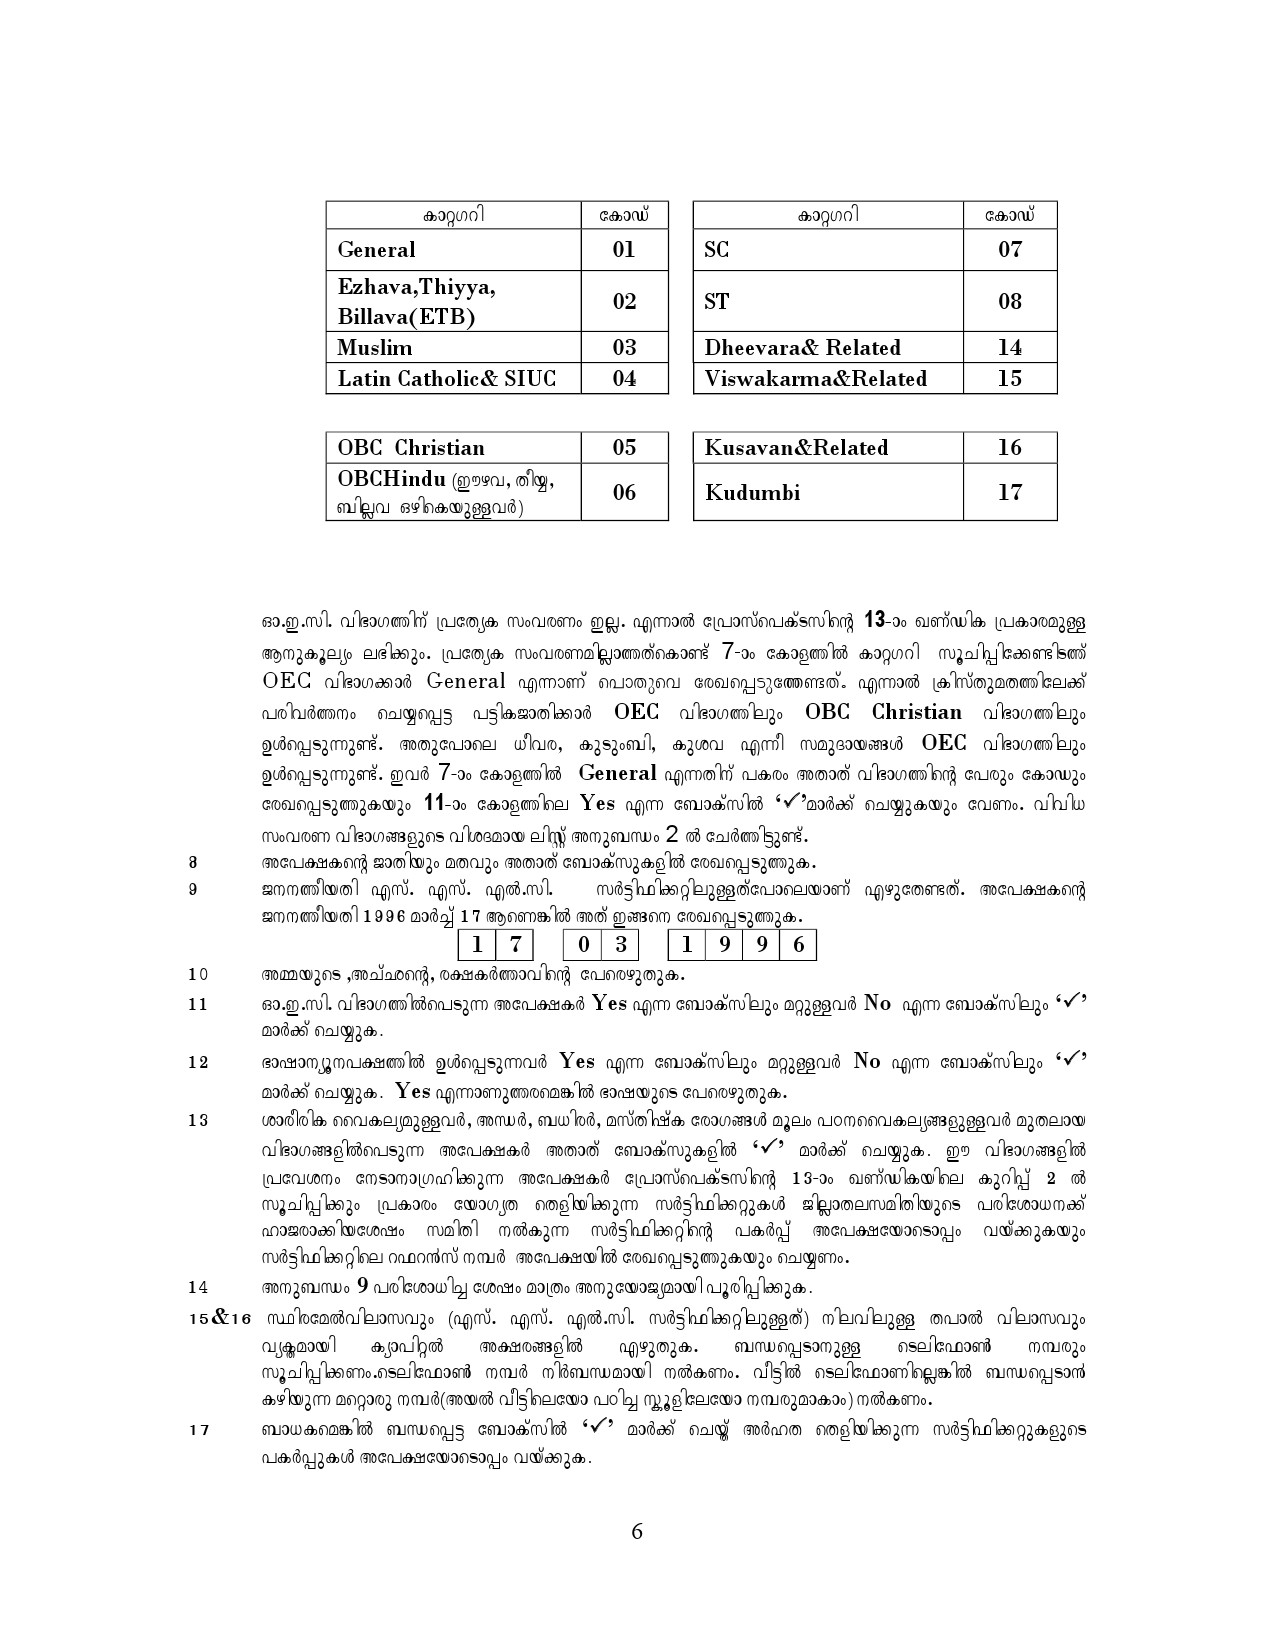 Higher Secondary School Online Application Manual in Malayalam - Notification Image 6